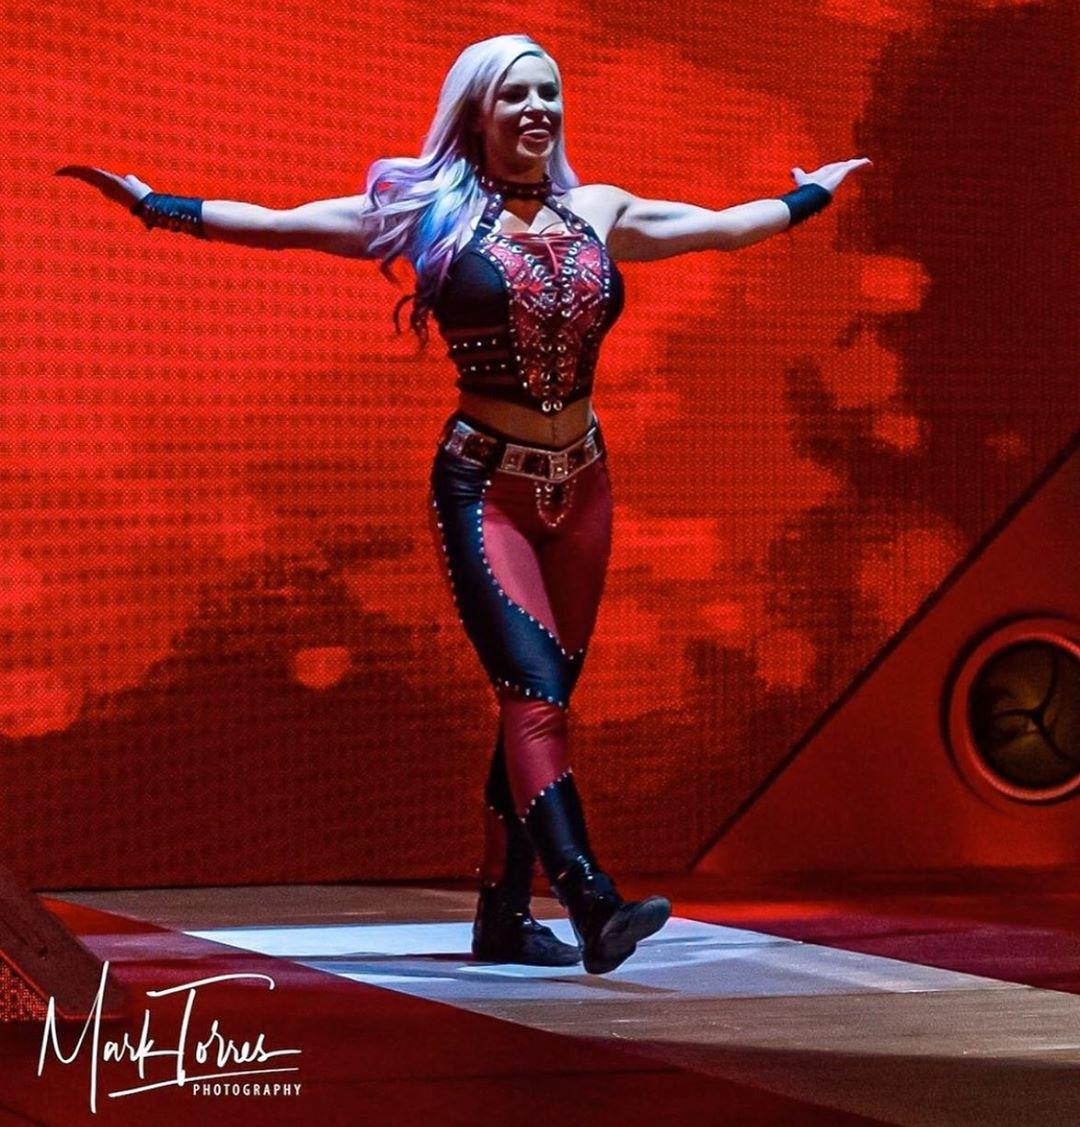 70+ Hot Pictures Of Dana Brooke Show Off This WWE Diva’s Sexy Body 591